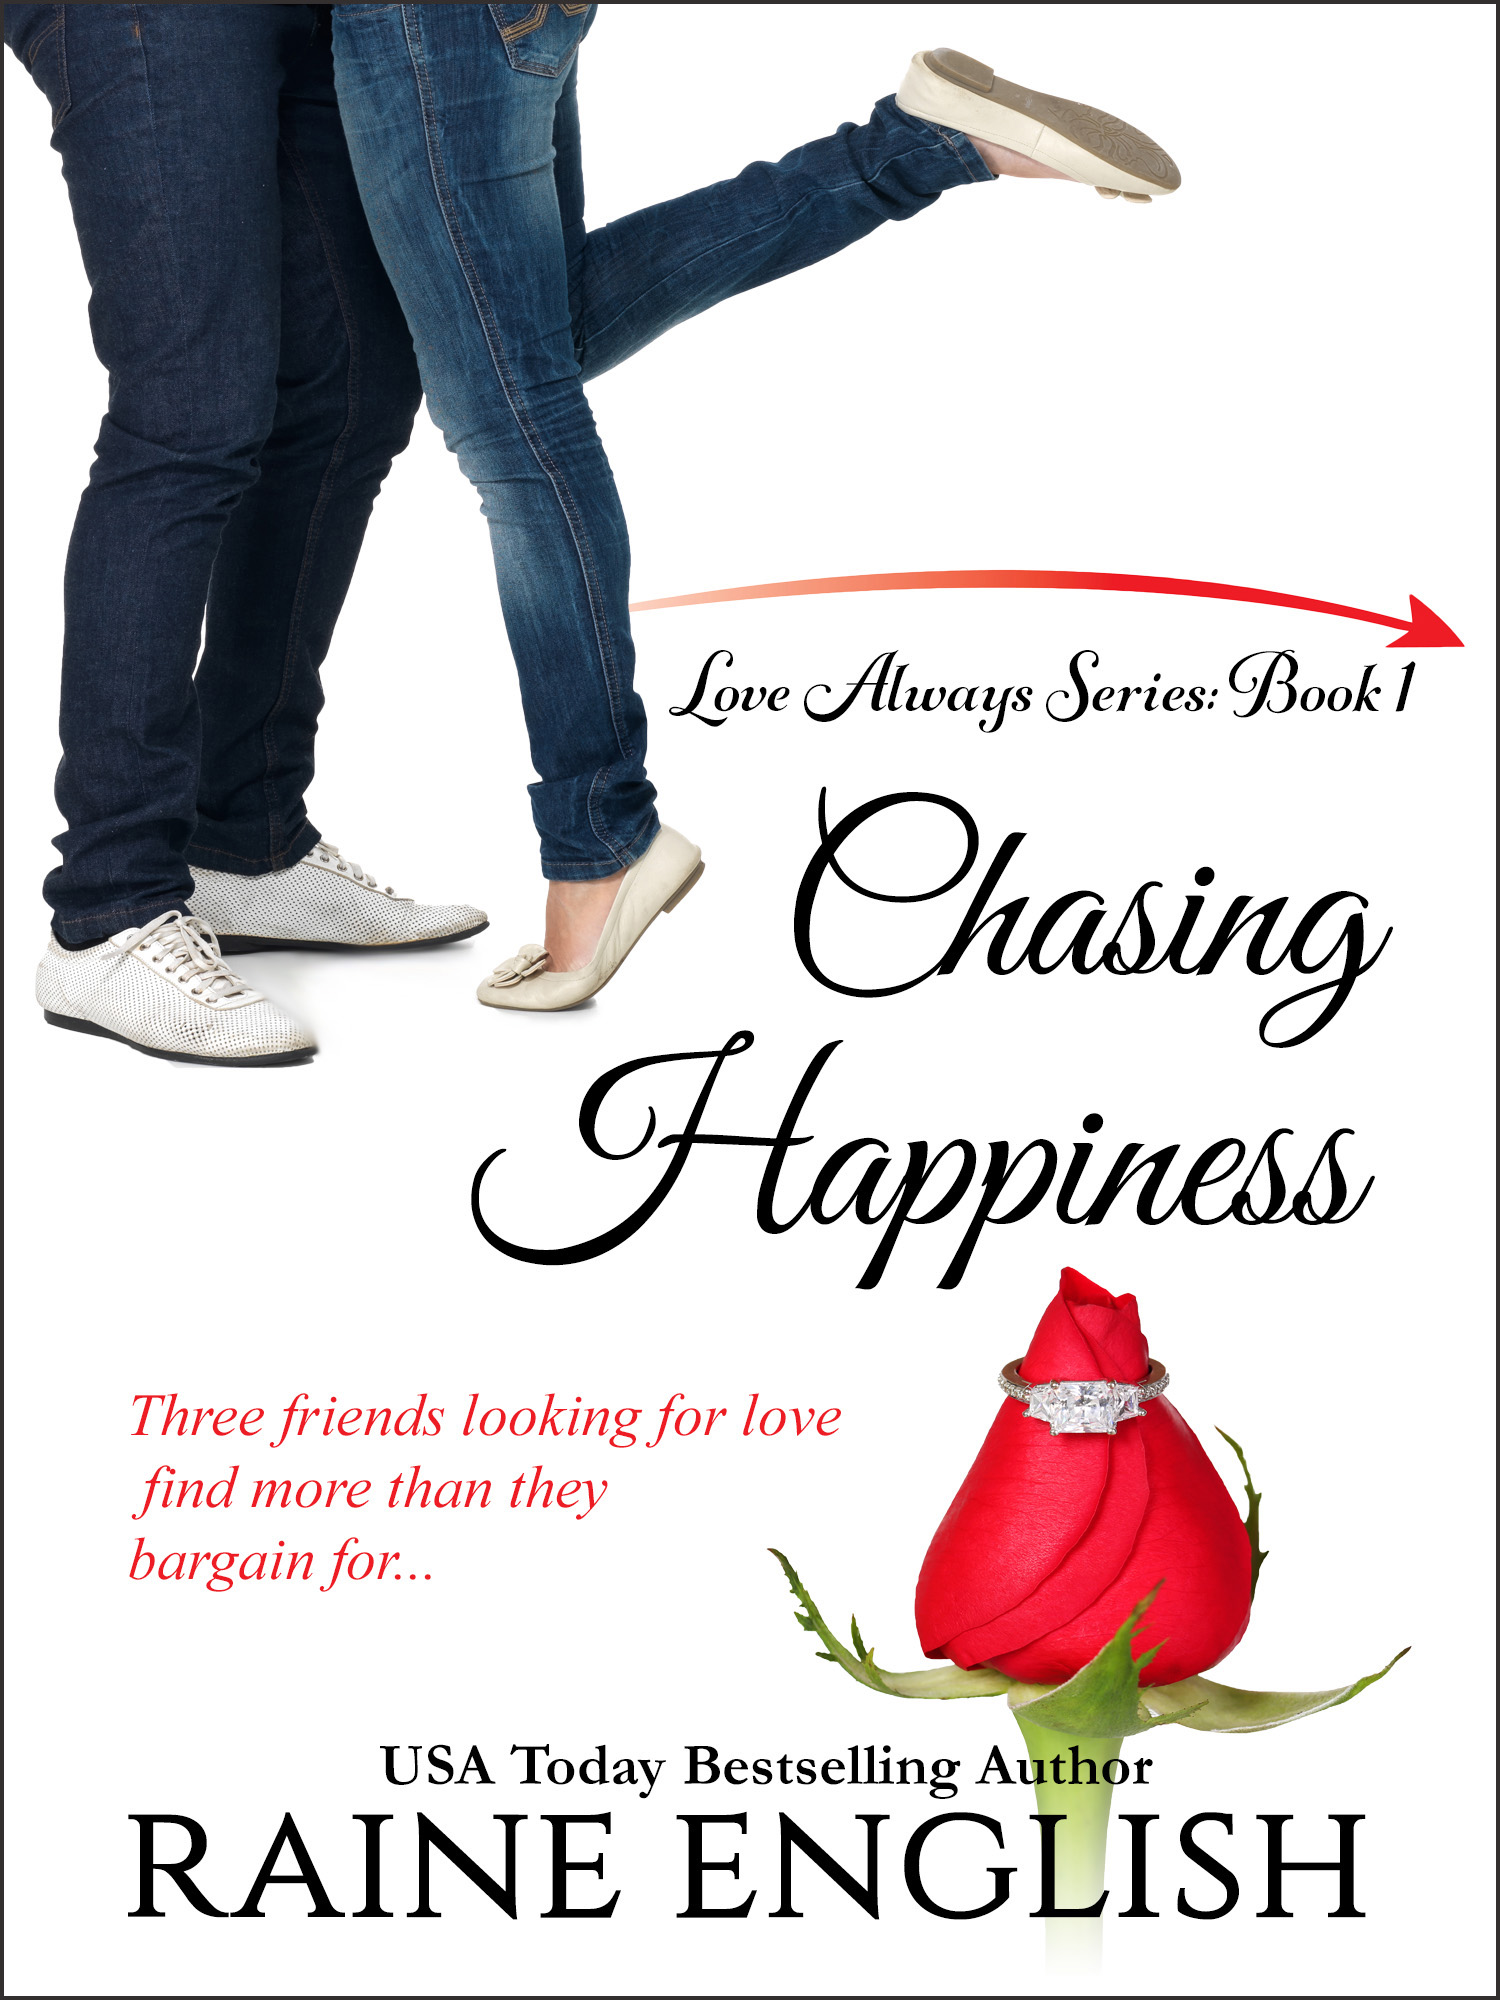 Chasing Happiness by Raine English